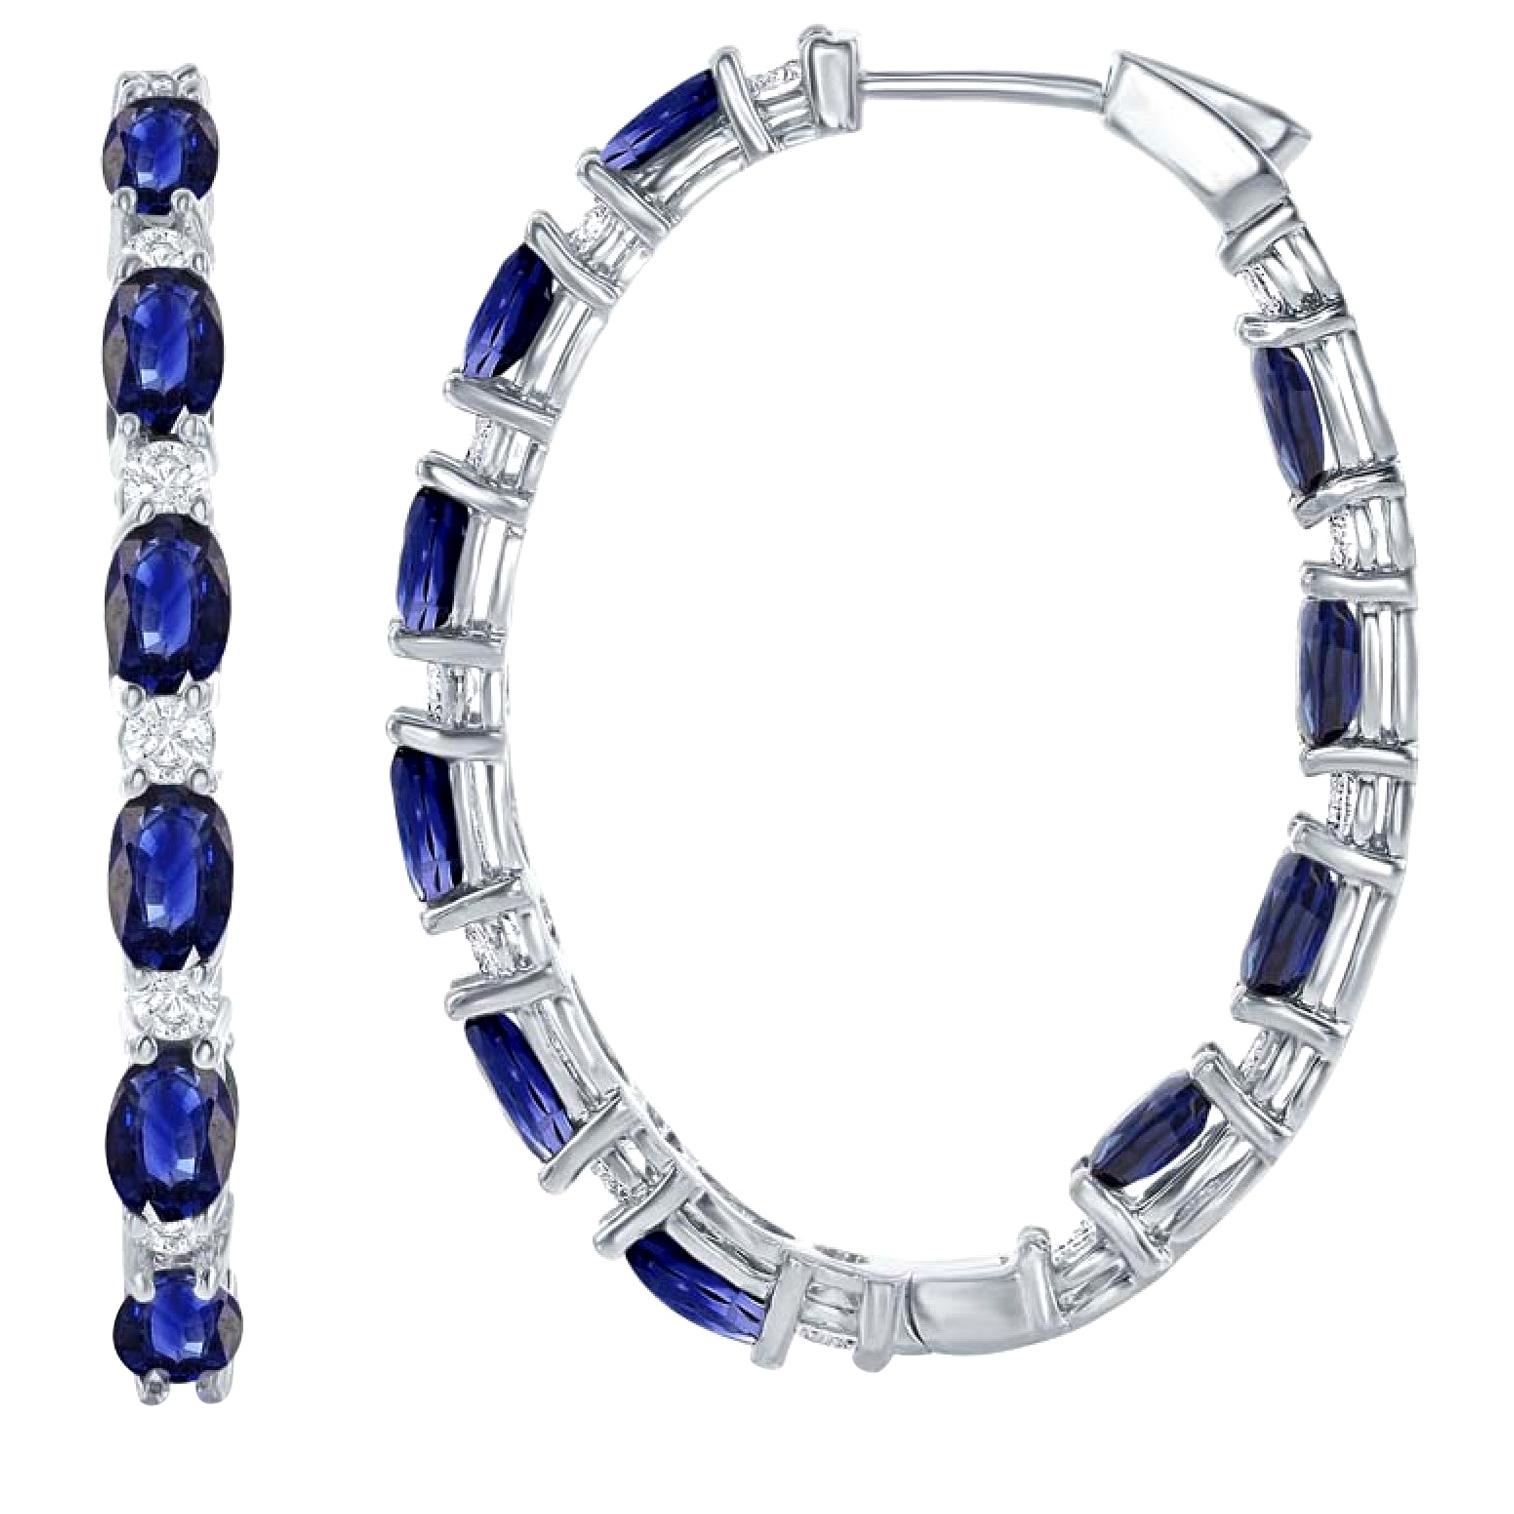 In and Out Hoop Earrings, 7.99ct of Sapphire, 1.13ct Diamond in 18kt White Gold For Sale